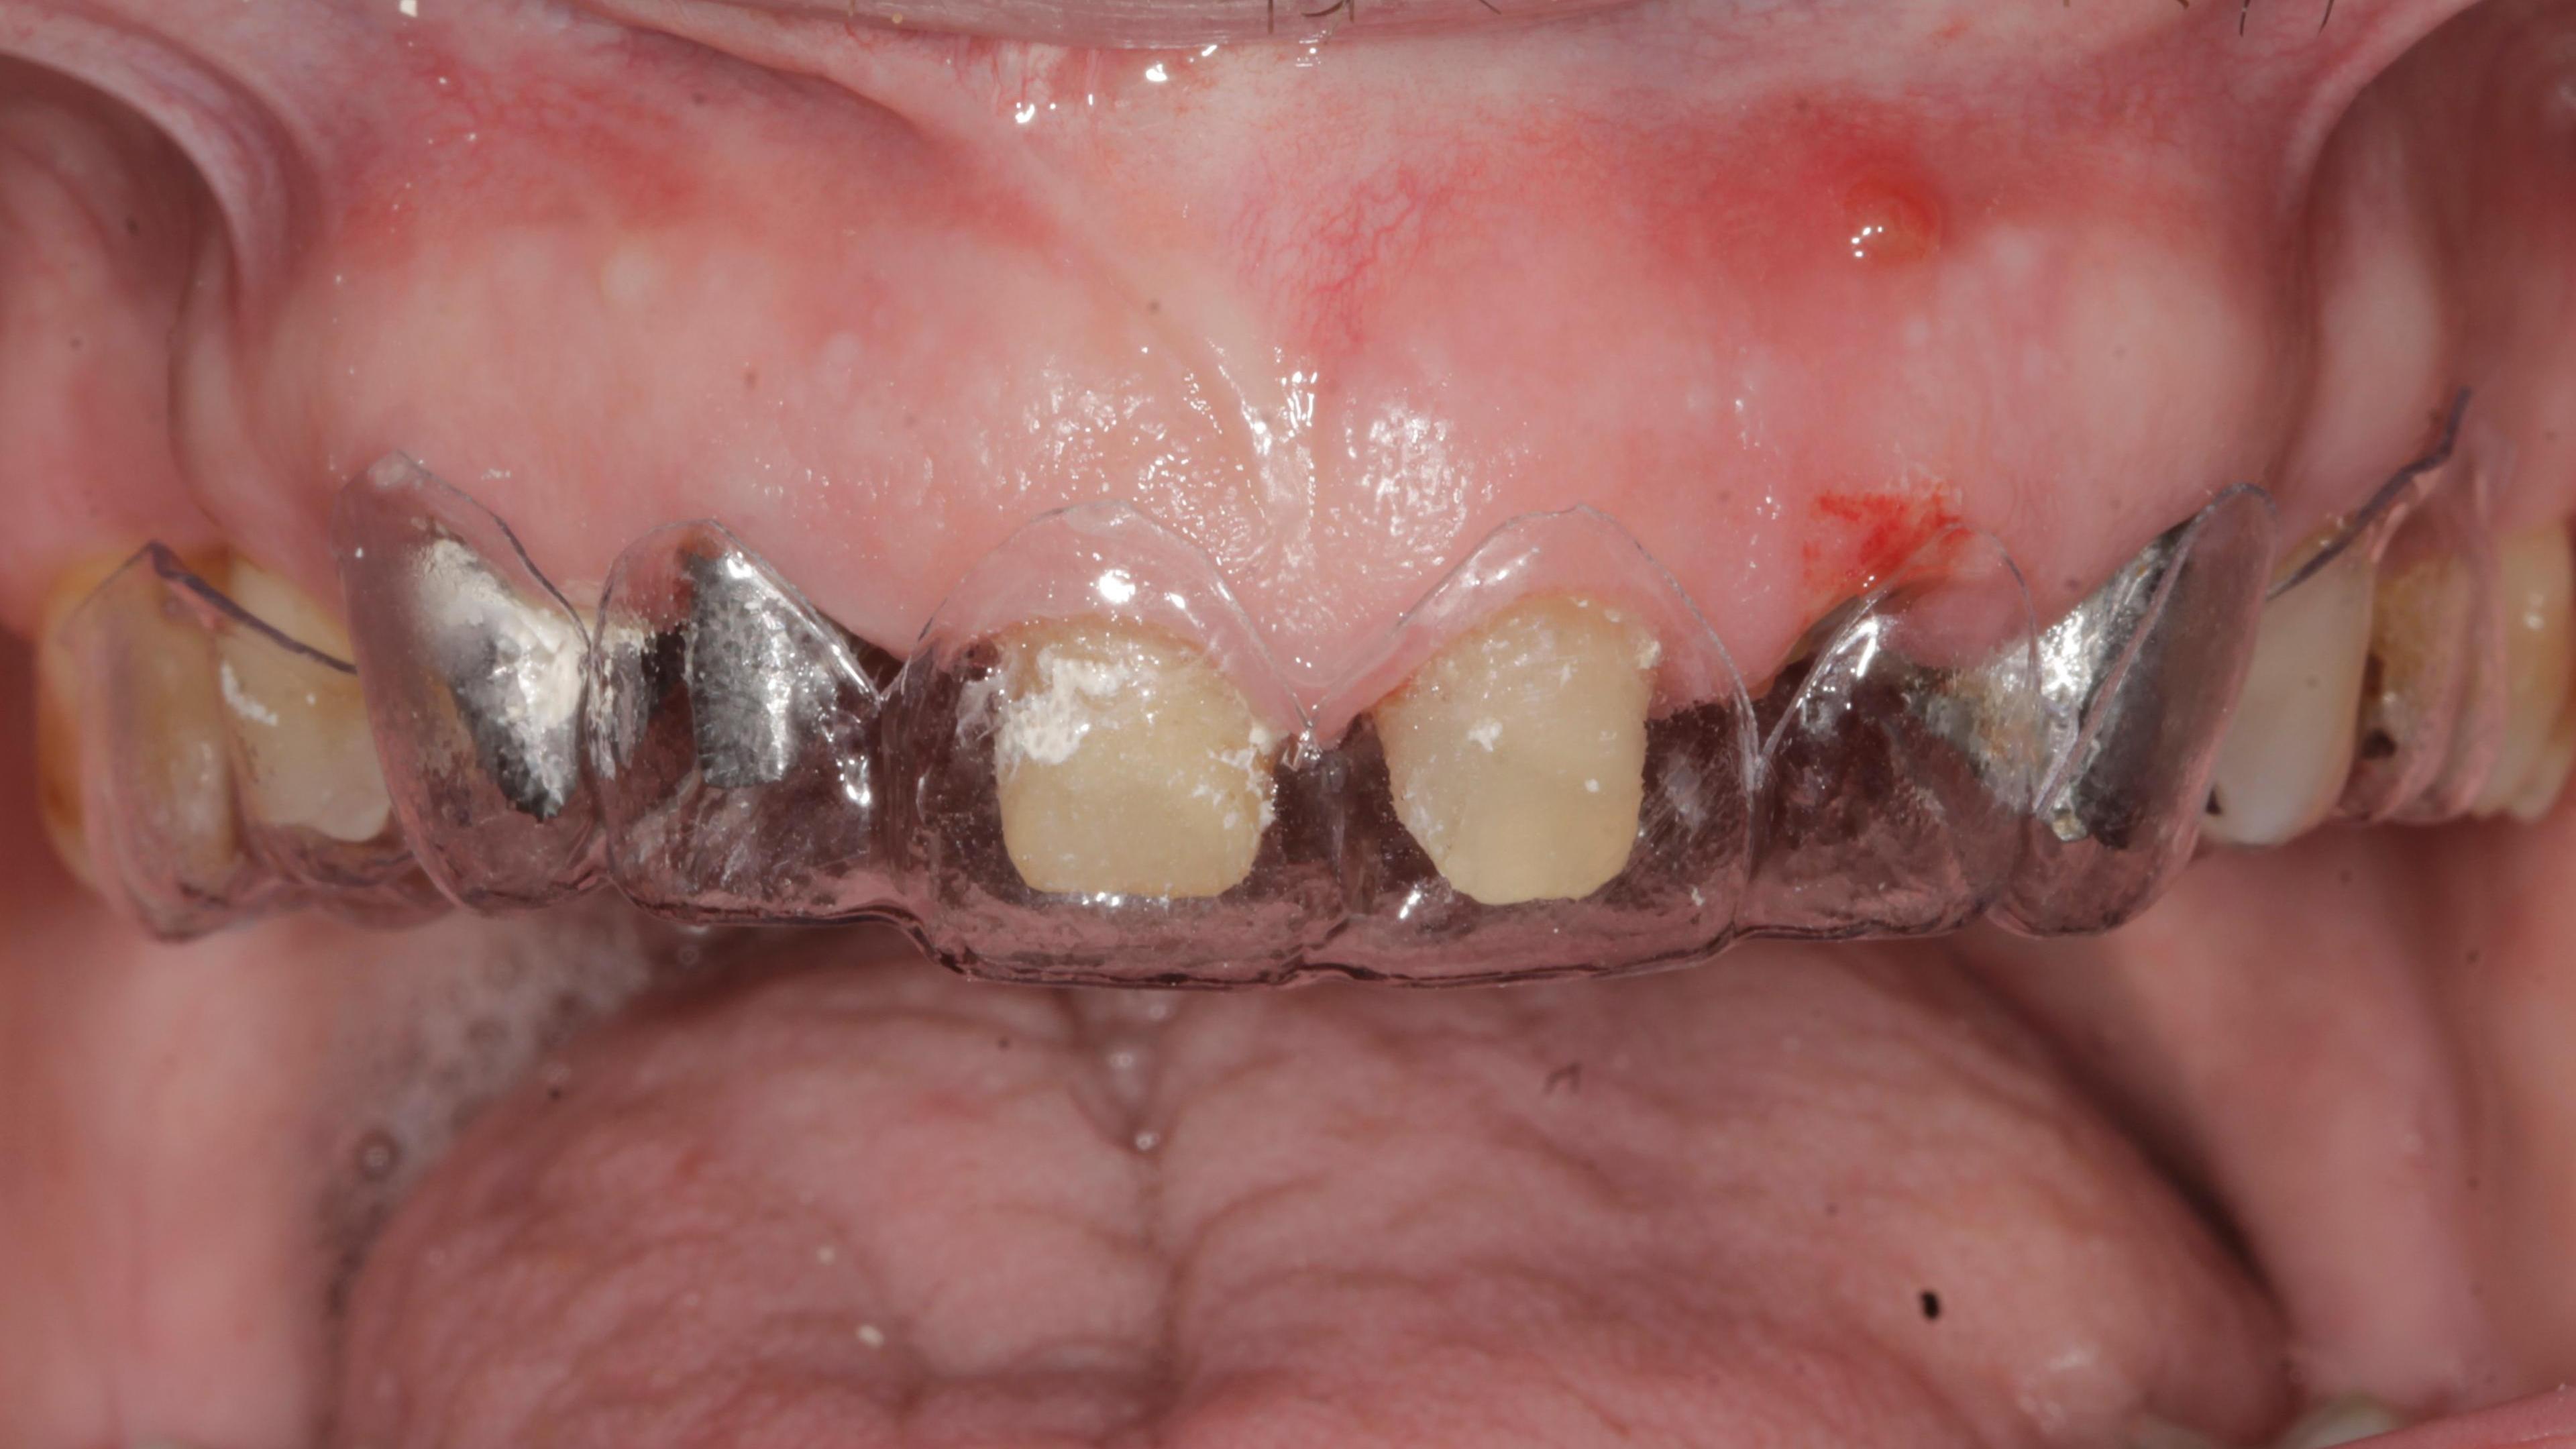 Crown lengthening Before treatment - Crown lengthening in the aesthetic zone